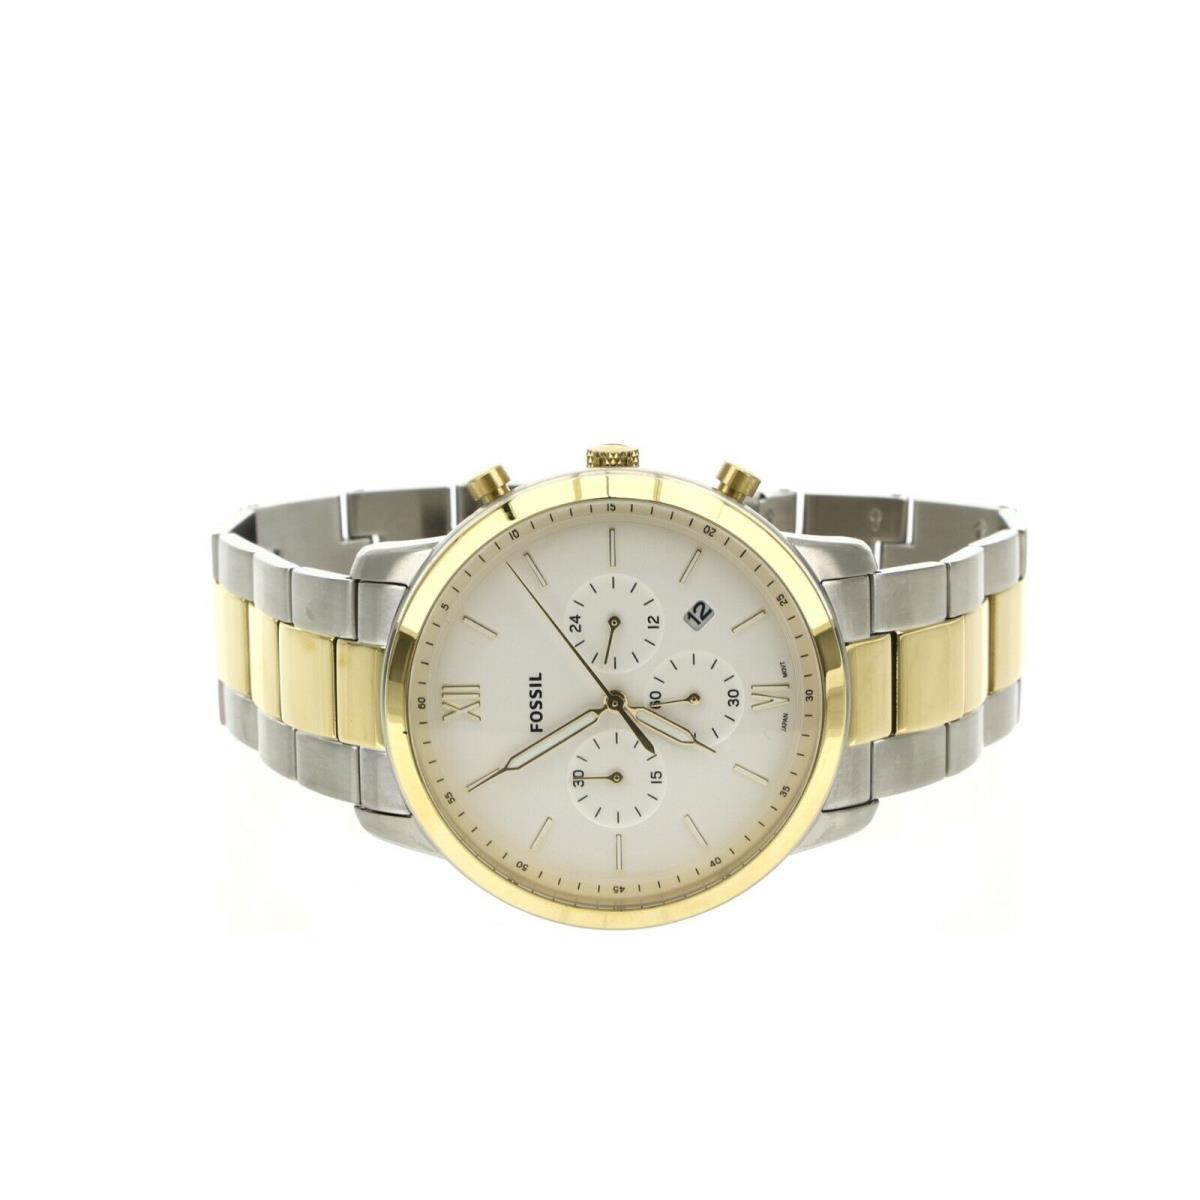 Fossil Men`s Gold Silver Neutra Chronograph Bracelet Watch 1234 - White Dial, Gold / Silver Band